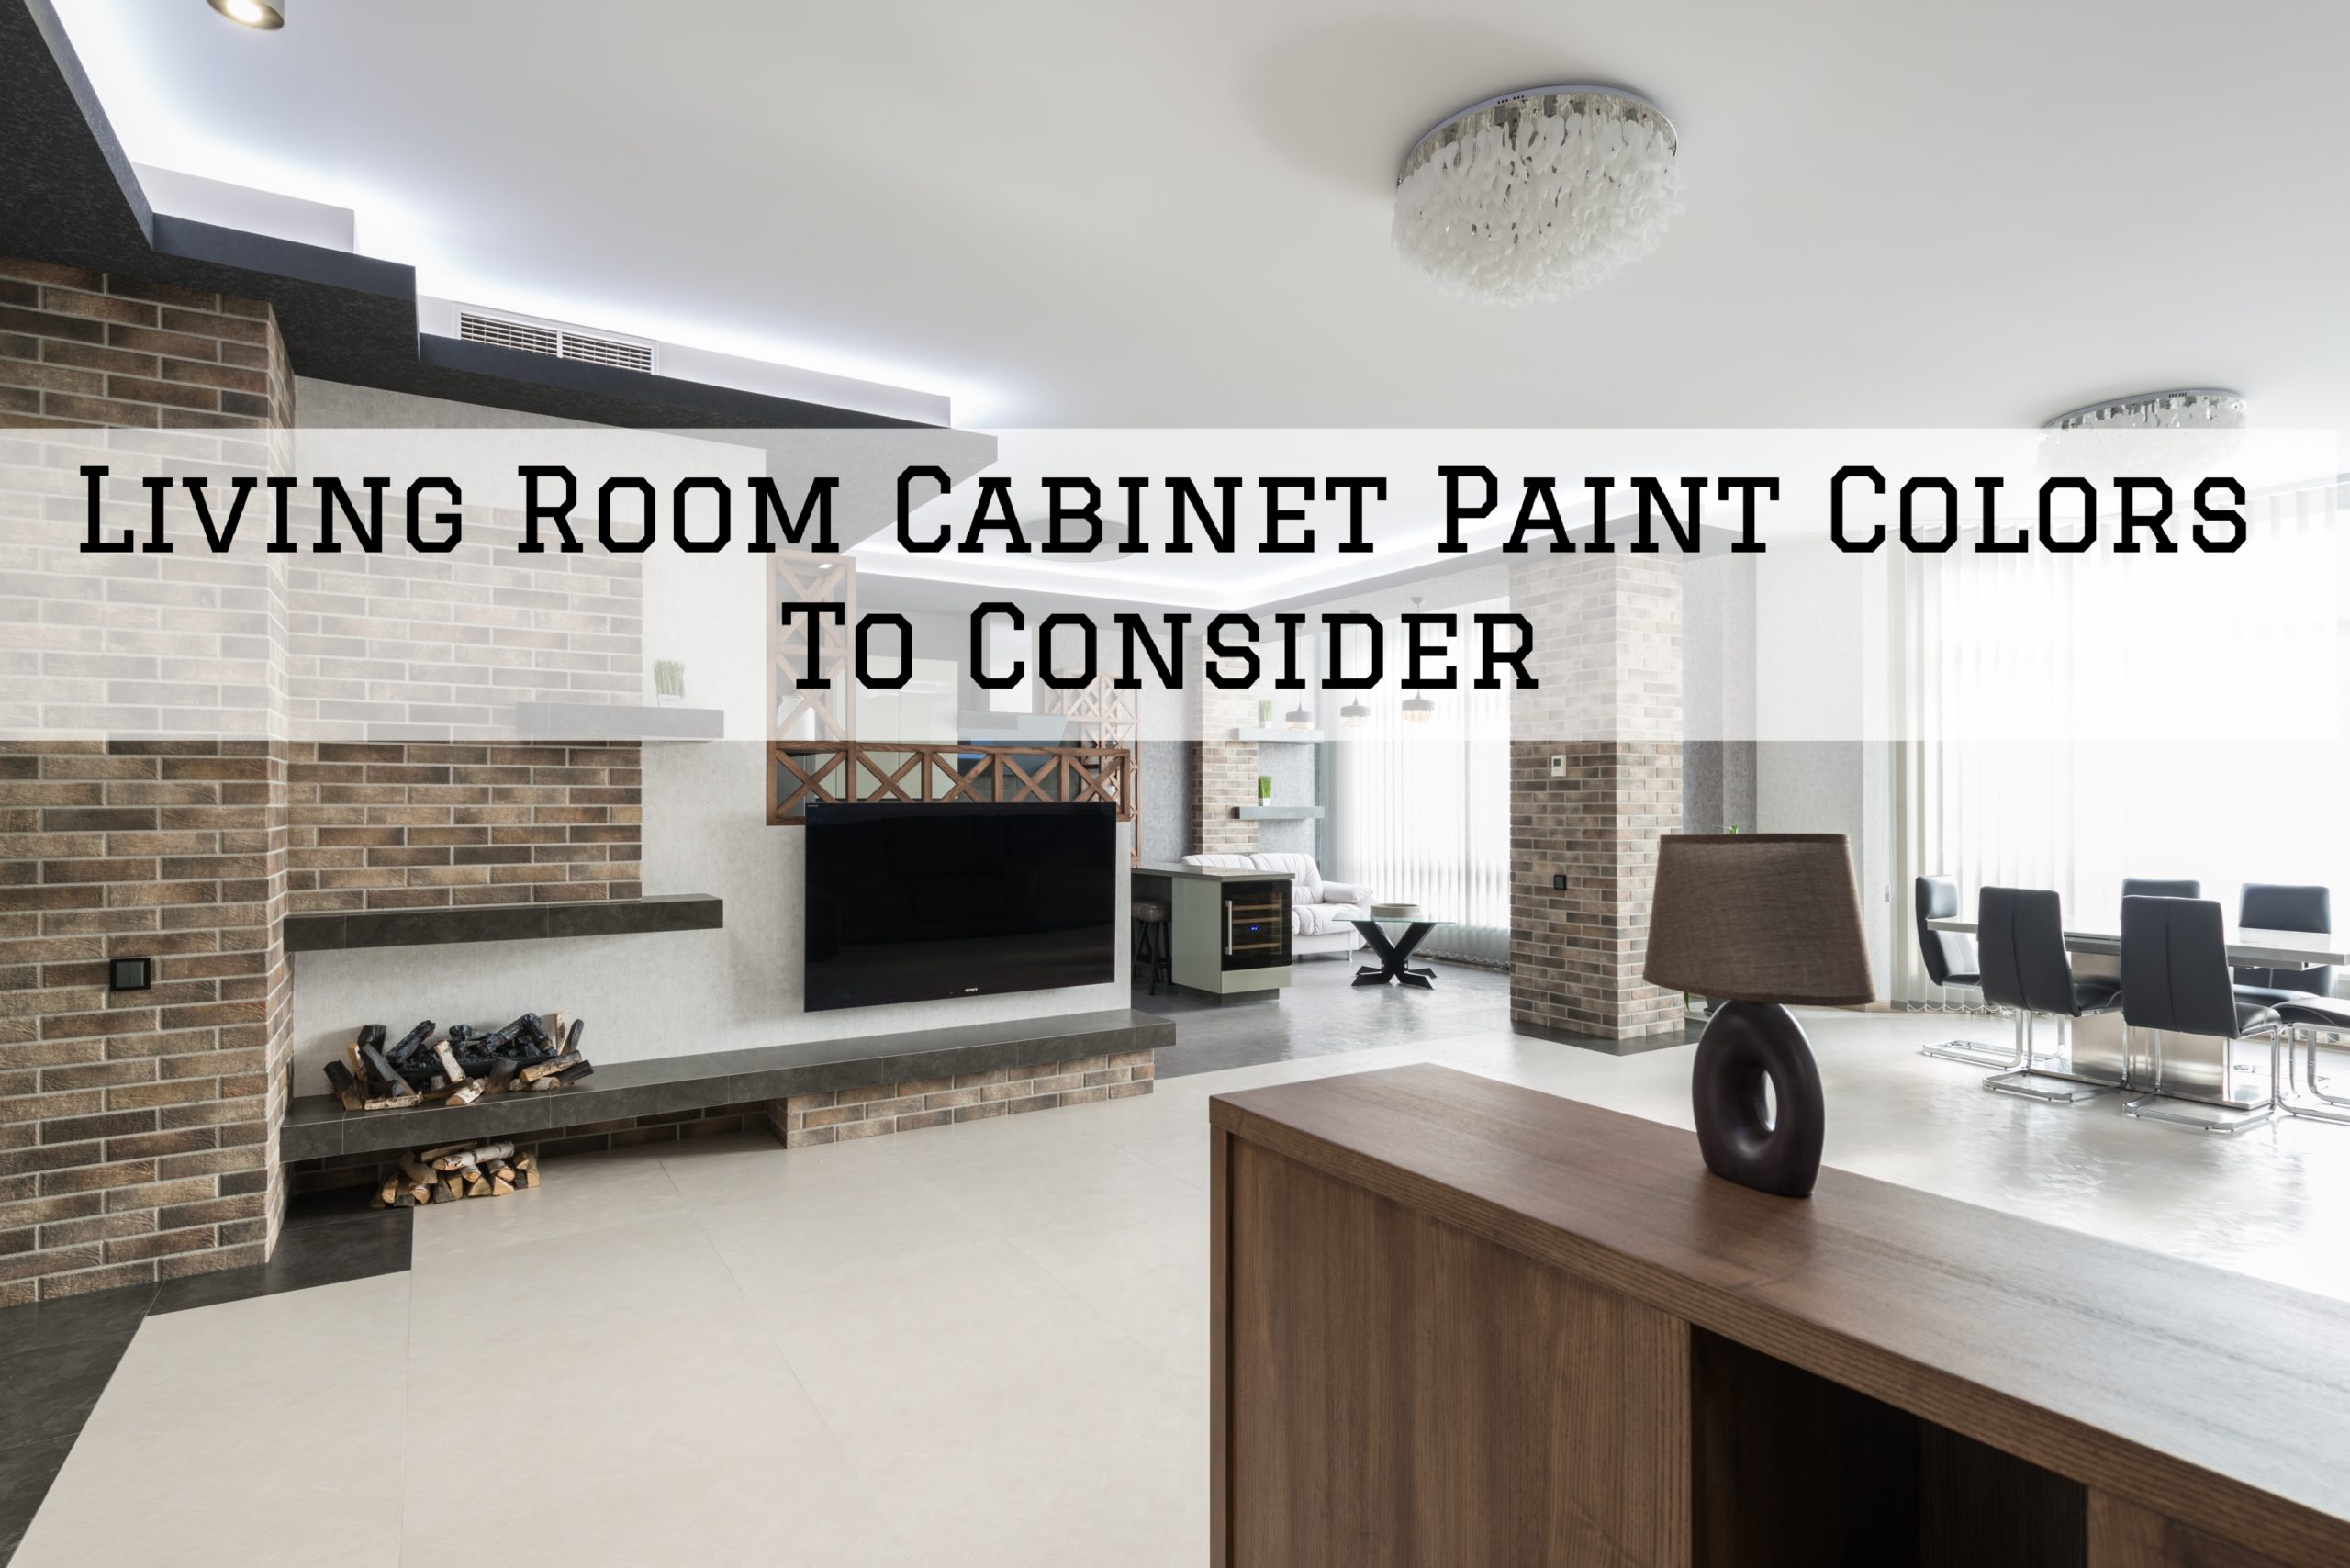 Living Room Cabinet Paint Colors To Consider in Westboro, Ontario